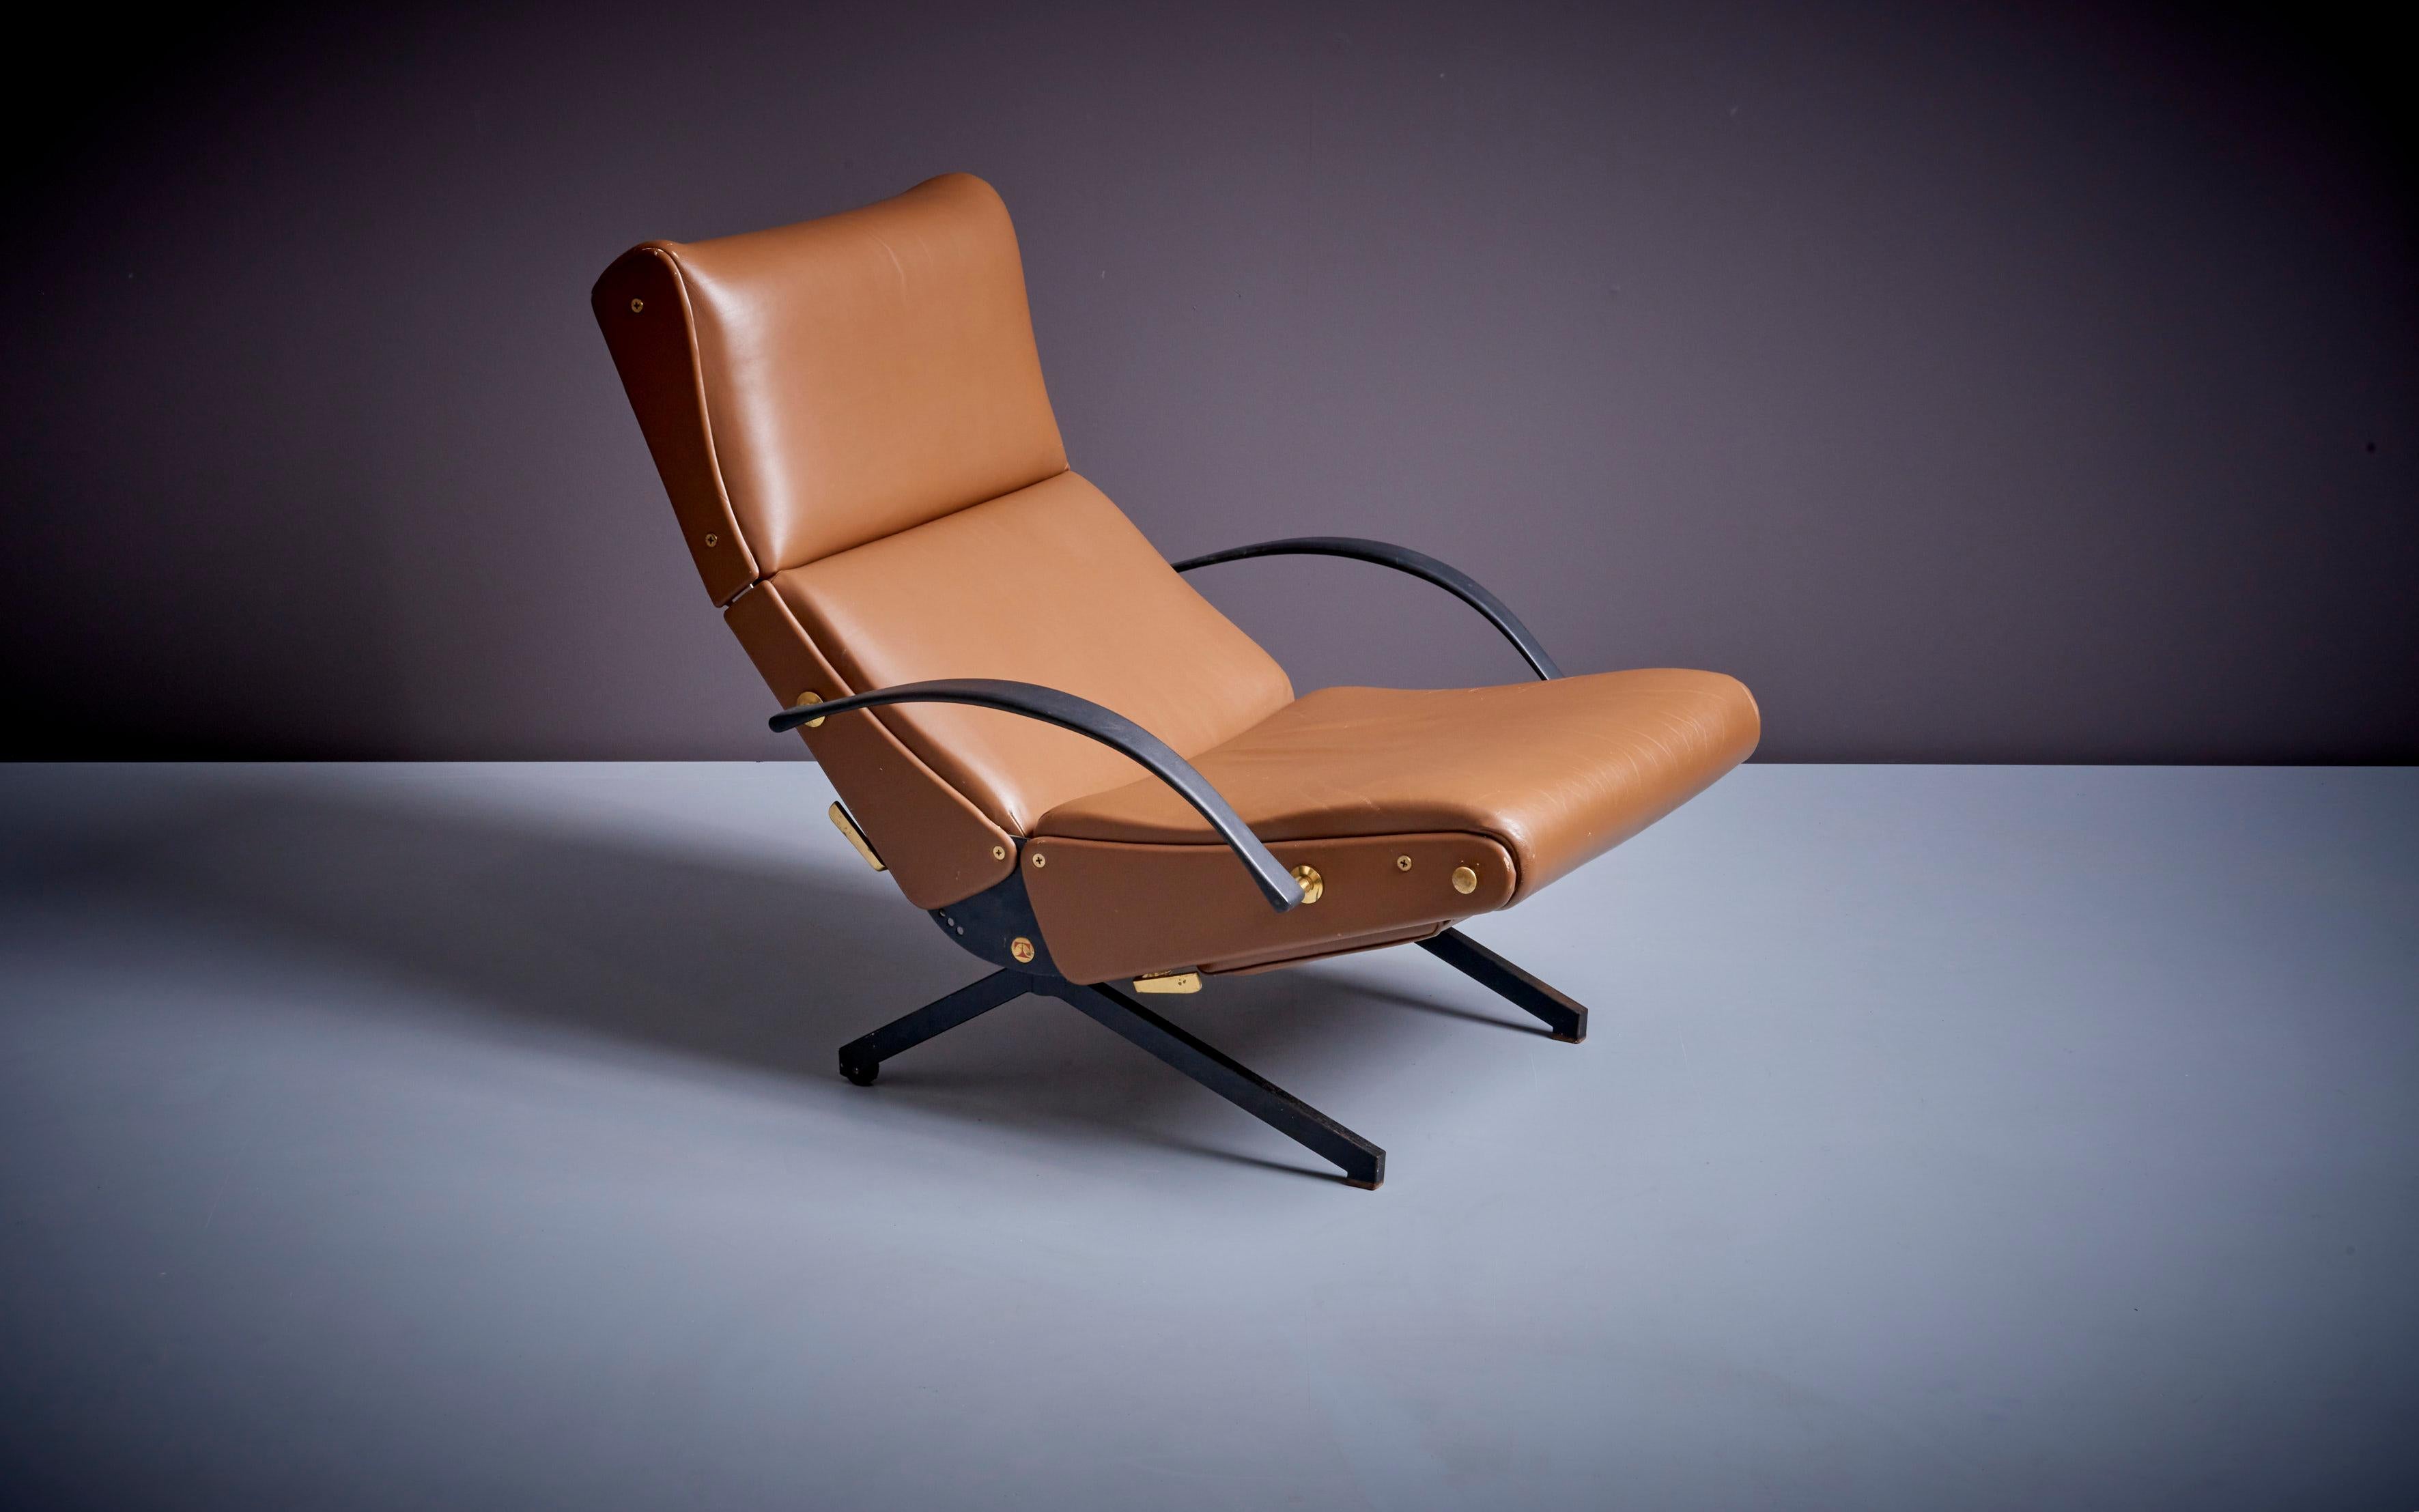 Osvaldo Borsani P40 chaise longue in thick brown leather with brass details and original rubber armrests. The chair is in very good condition.

